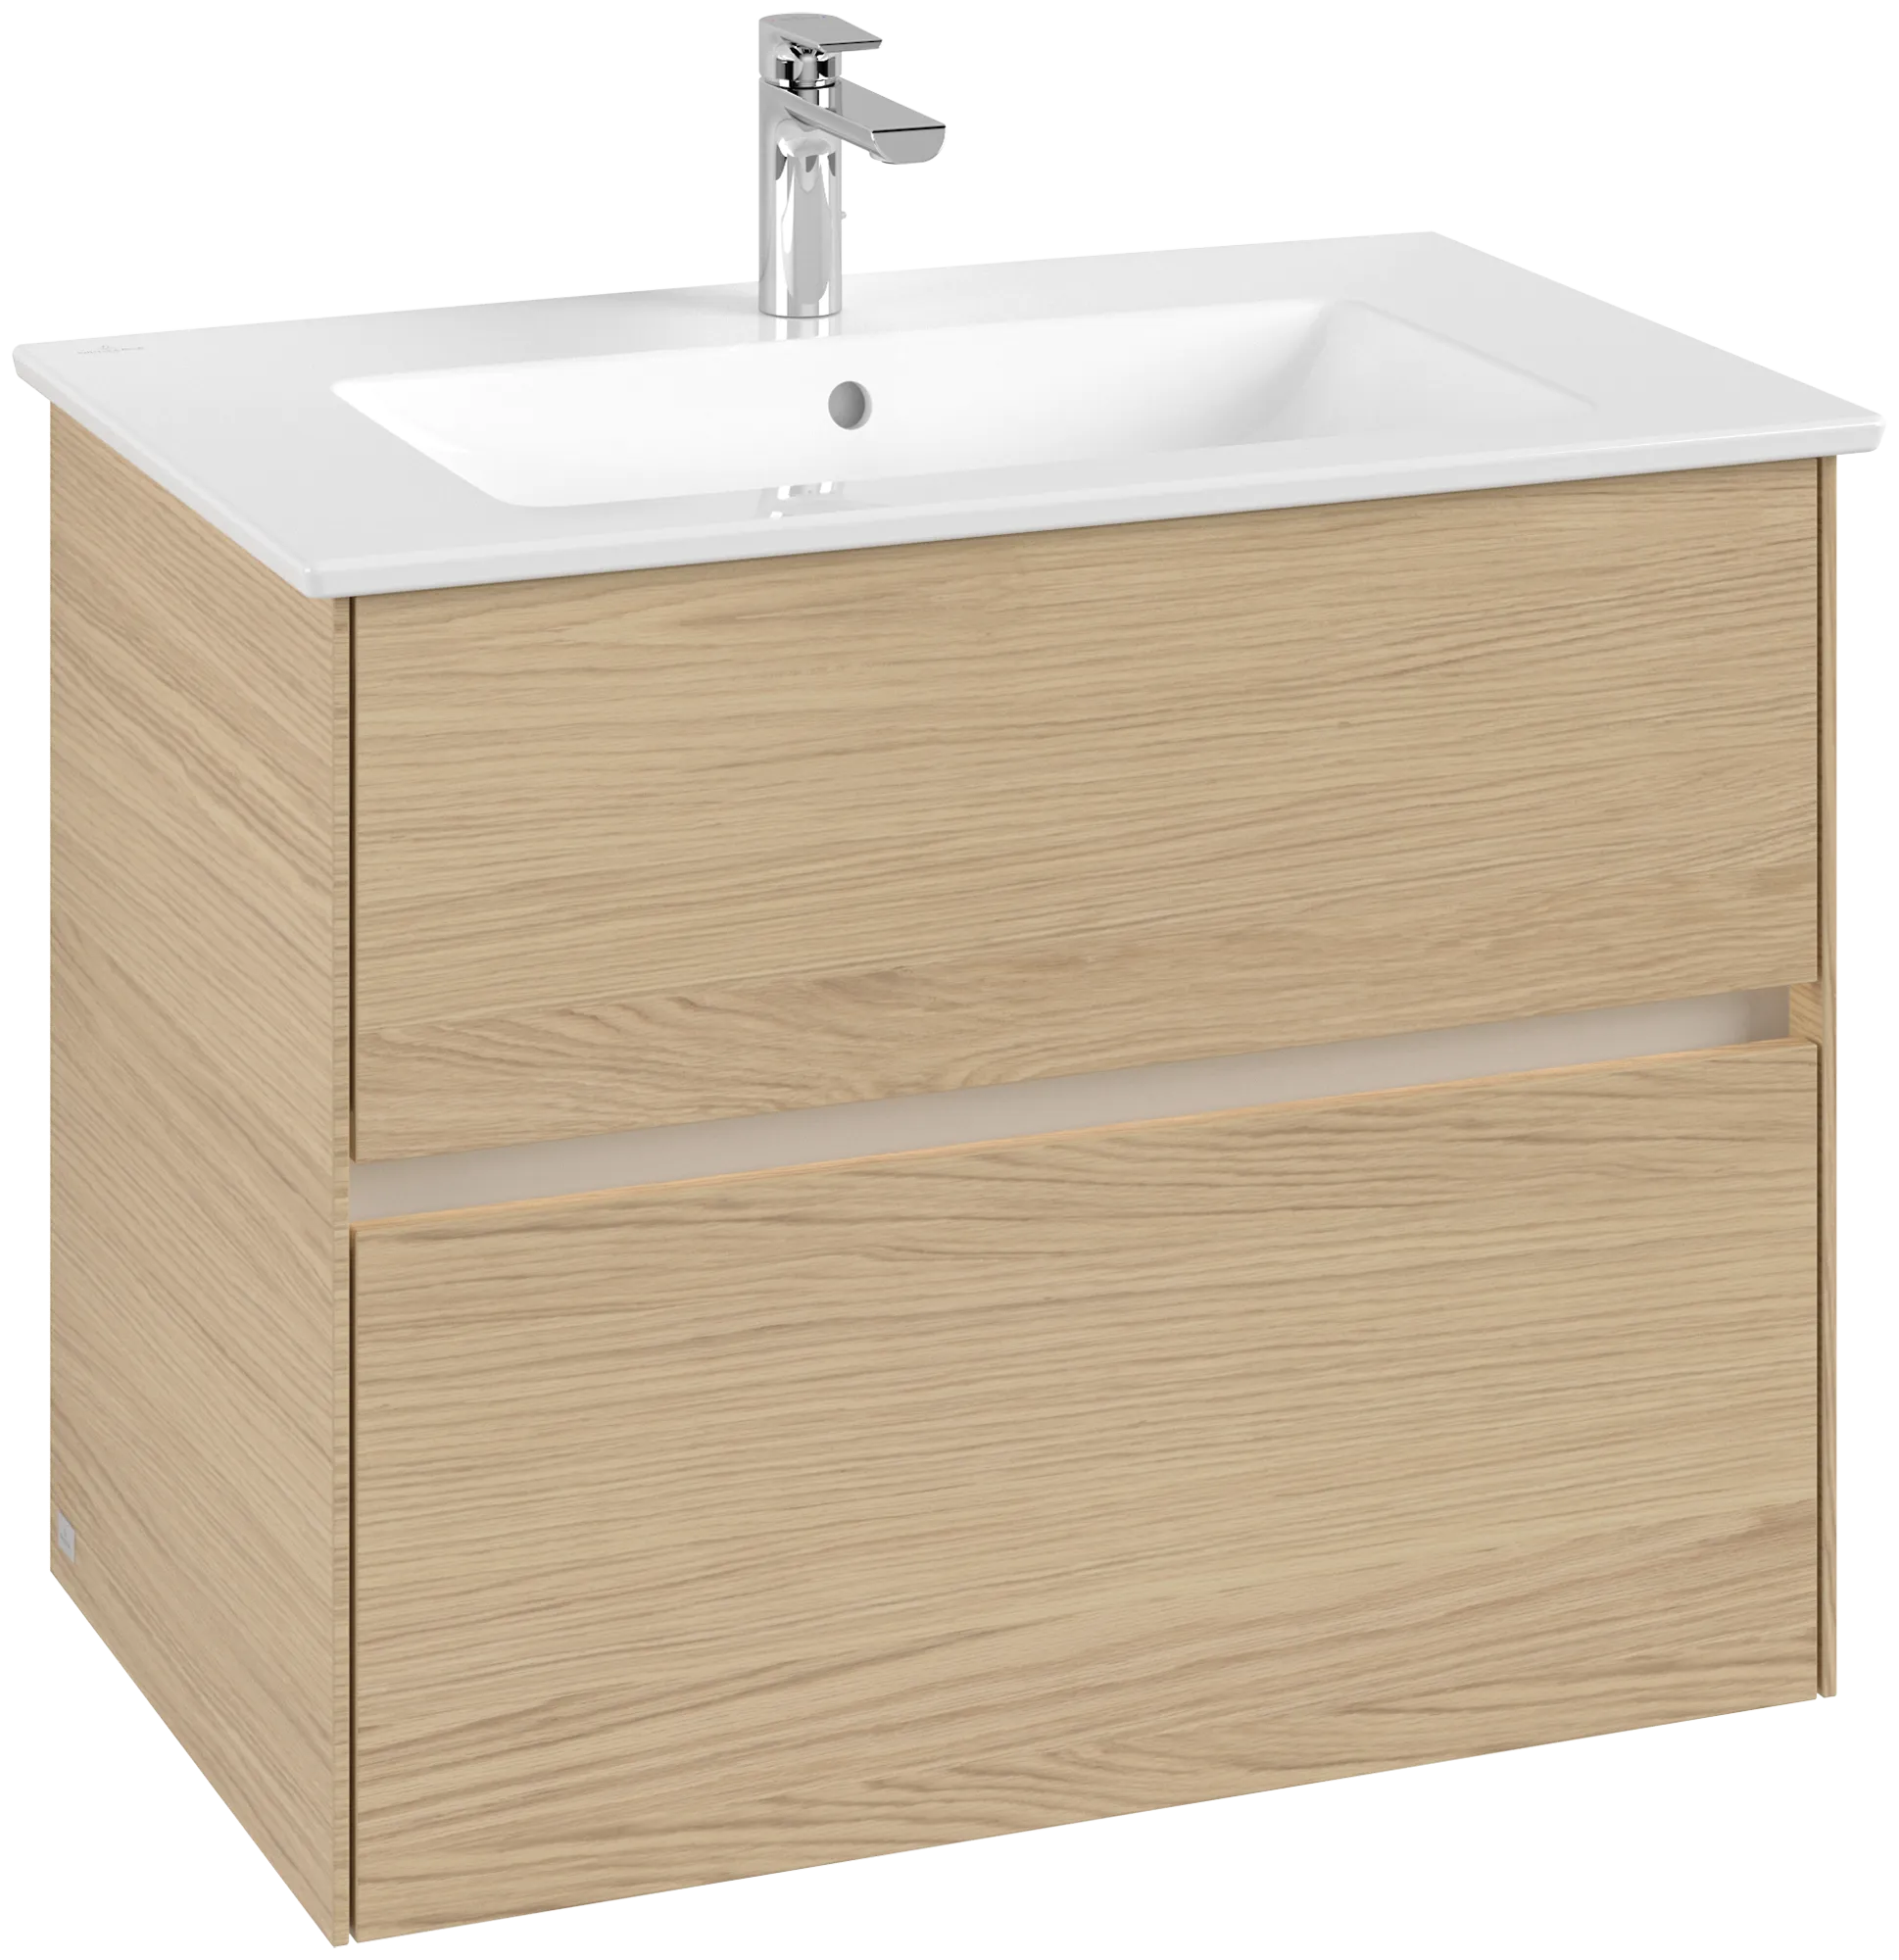 Picture of VILLEROY BOCH Collaro Vanity unit, with lighting, 2 pull-out compartments, 761 x 610 x 480 mm, Nordic Oak #C144B0VJ